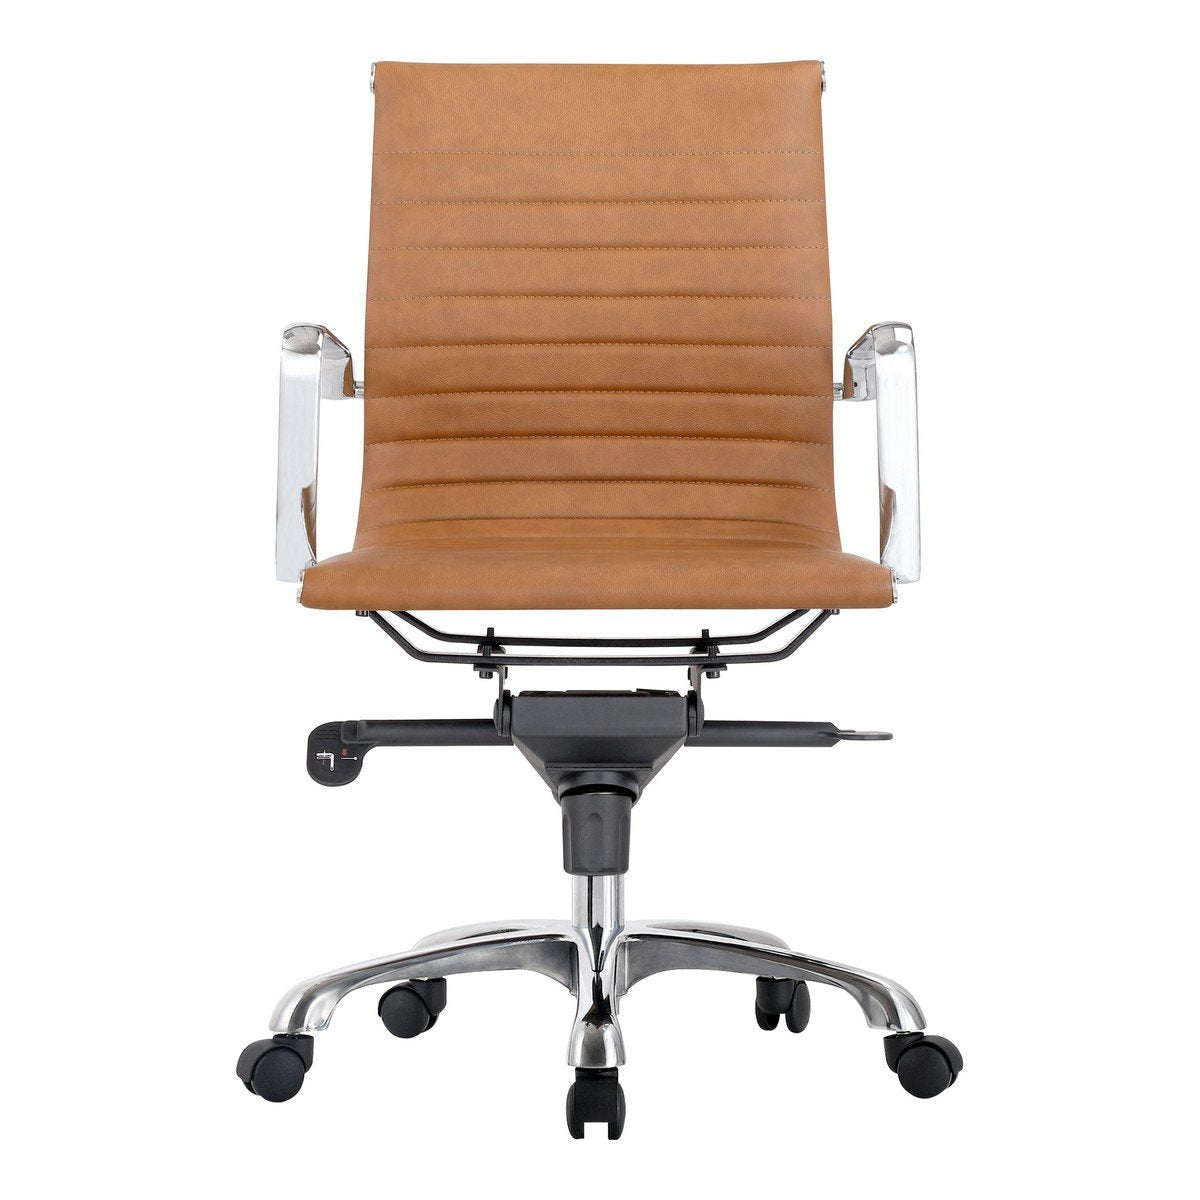 Moe's Home Collection Omega Swivel office Chair Low Back Tan - ZM-1002-40 - Moe's Home Collection - Office Chairs - Minimal And Modern - 1